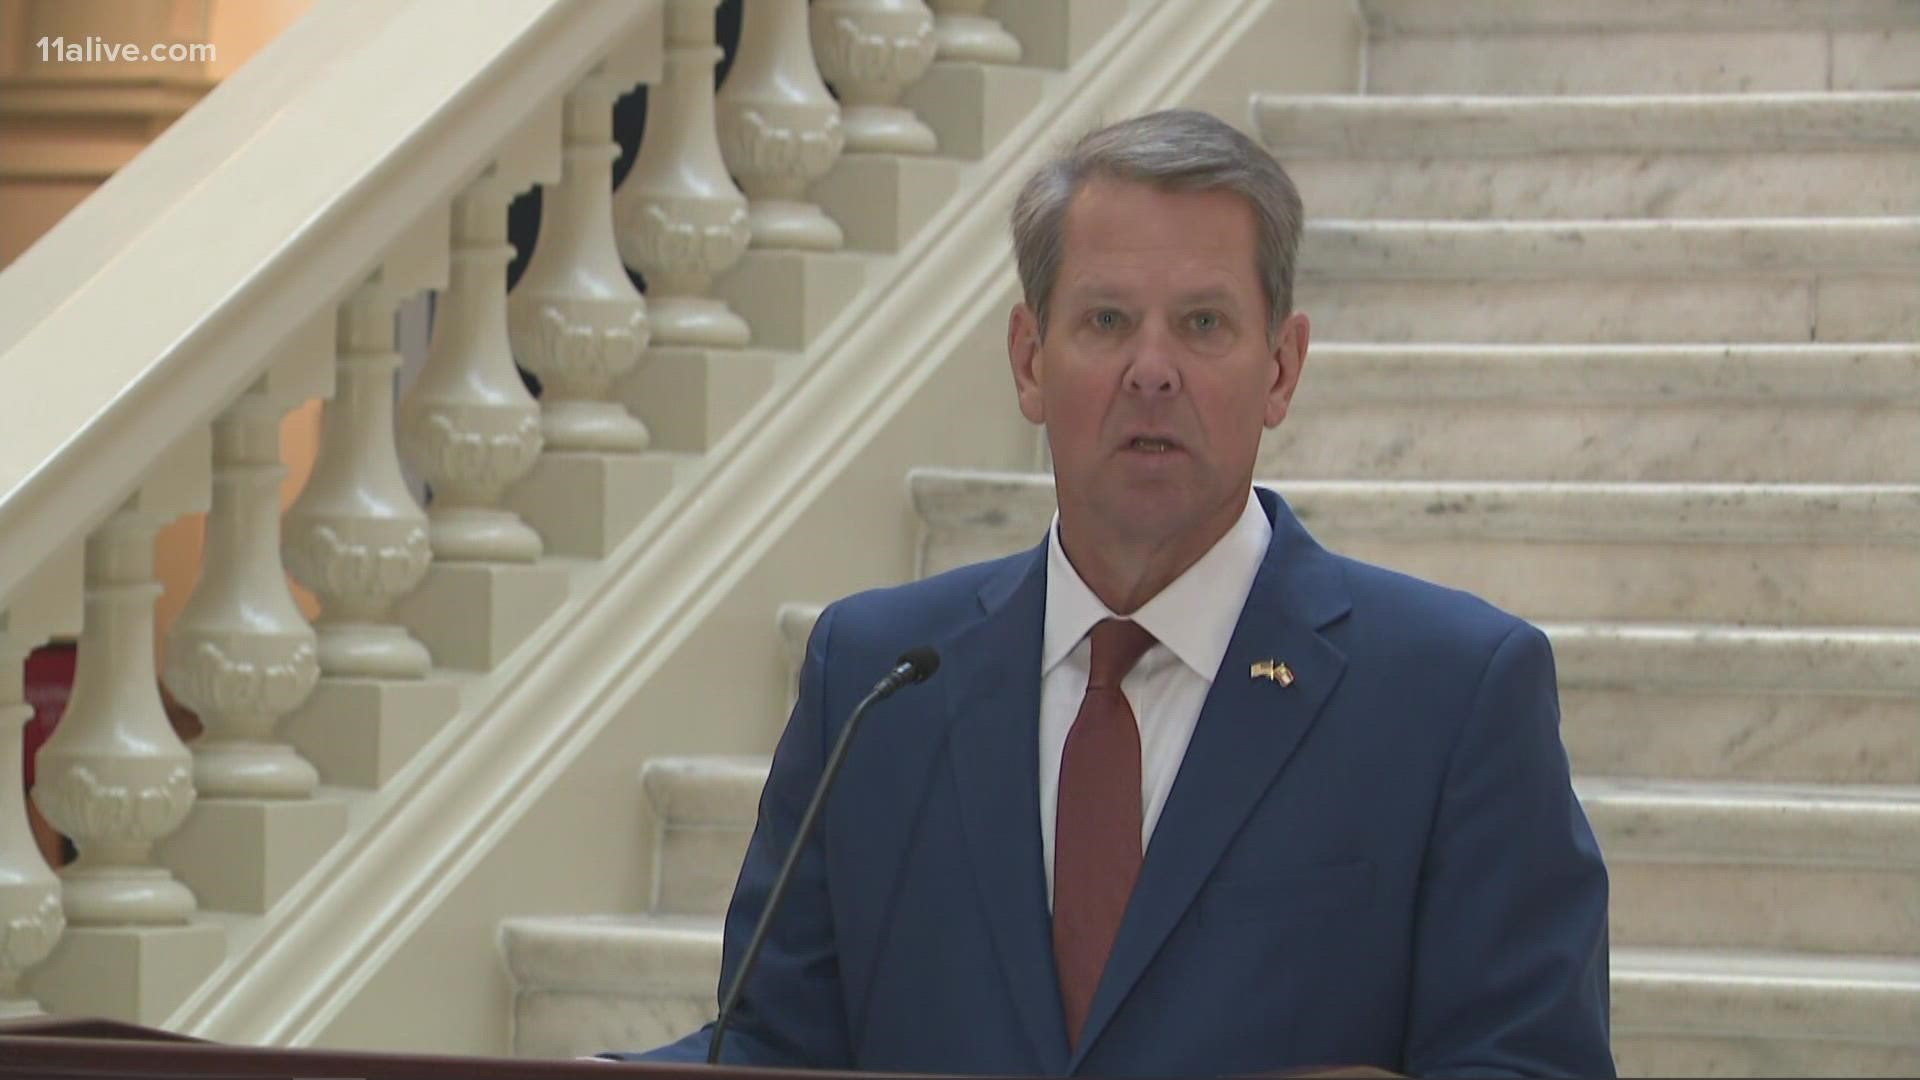 The governor held a press conference on Thursday.